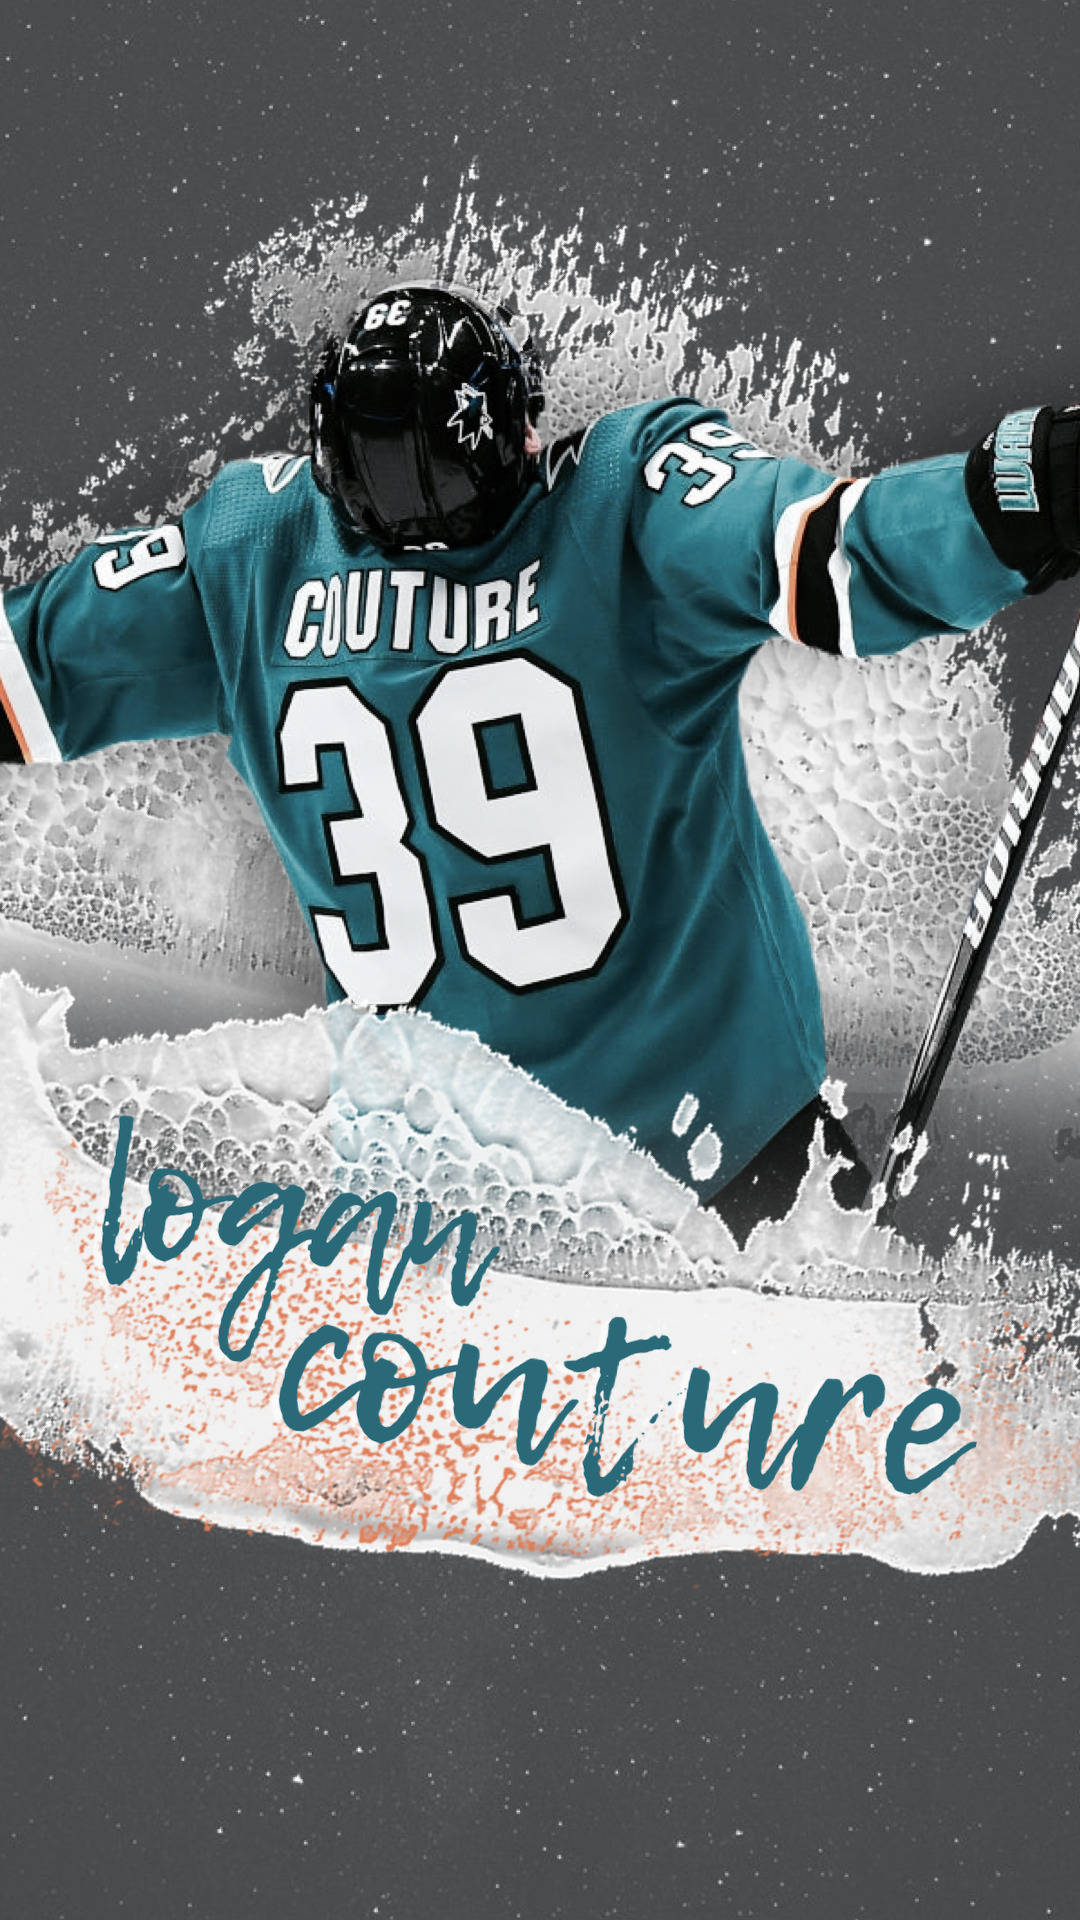 Logan Couture - A Vision Of Strength On Ice